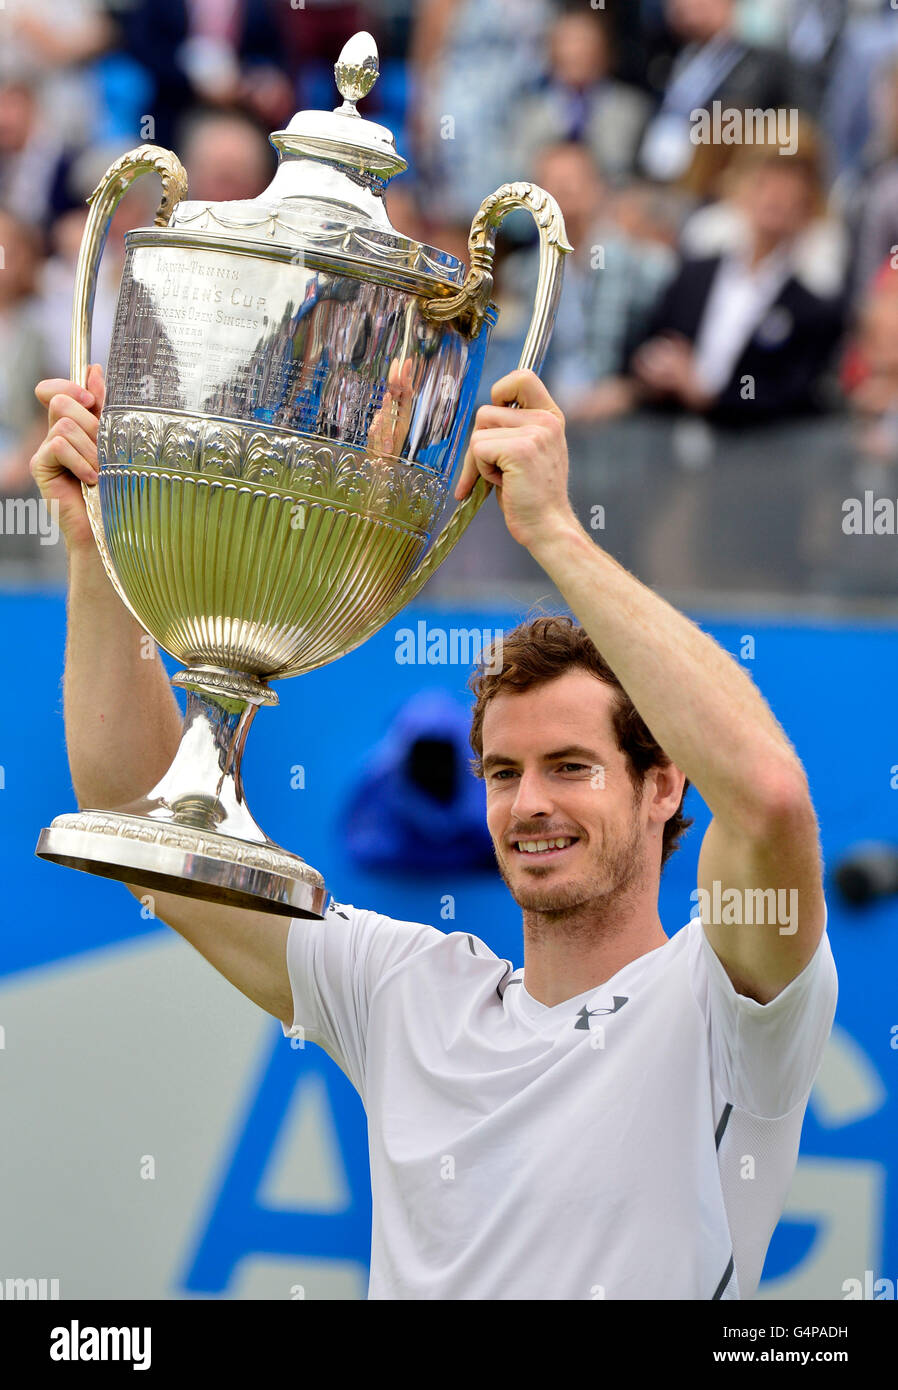 London, UK. 19th June, 2016. Aegon Tennis Championships Queens Club London  UK Final: Andy Murray GBR v Milos Raonic CAN Murray wins in 3 sets 6-7 6-4  6-4 with the champions cup